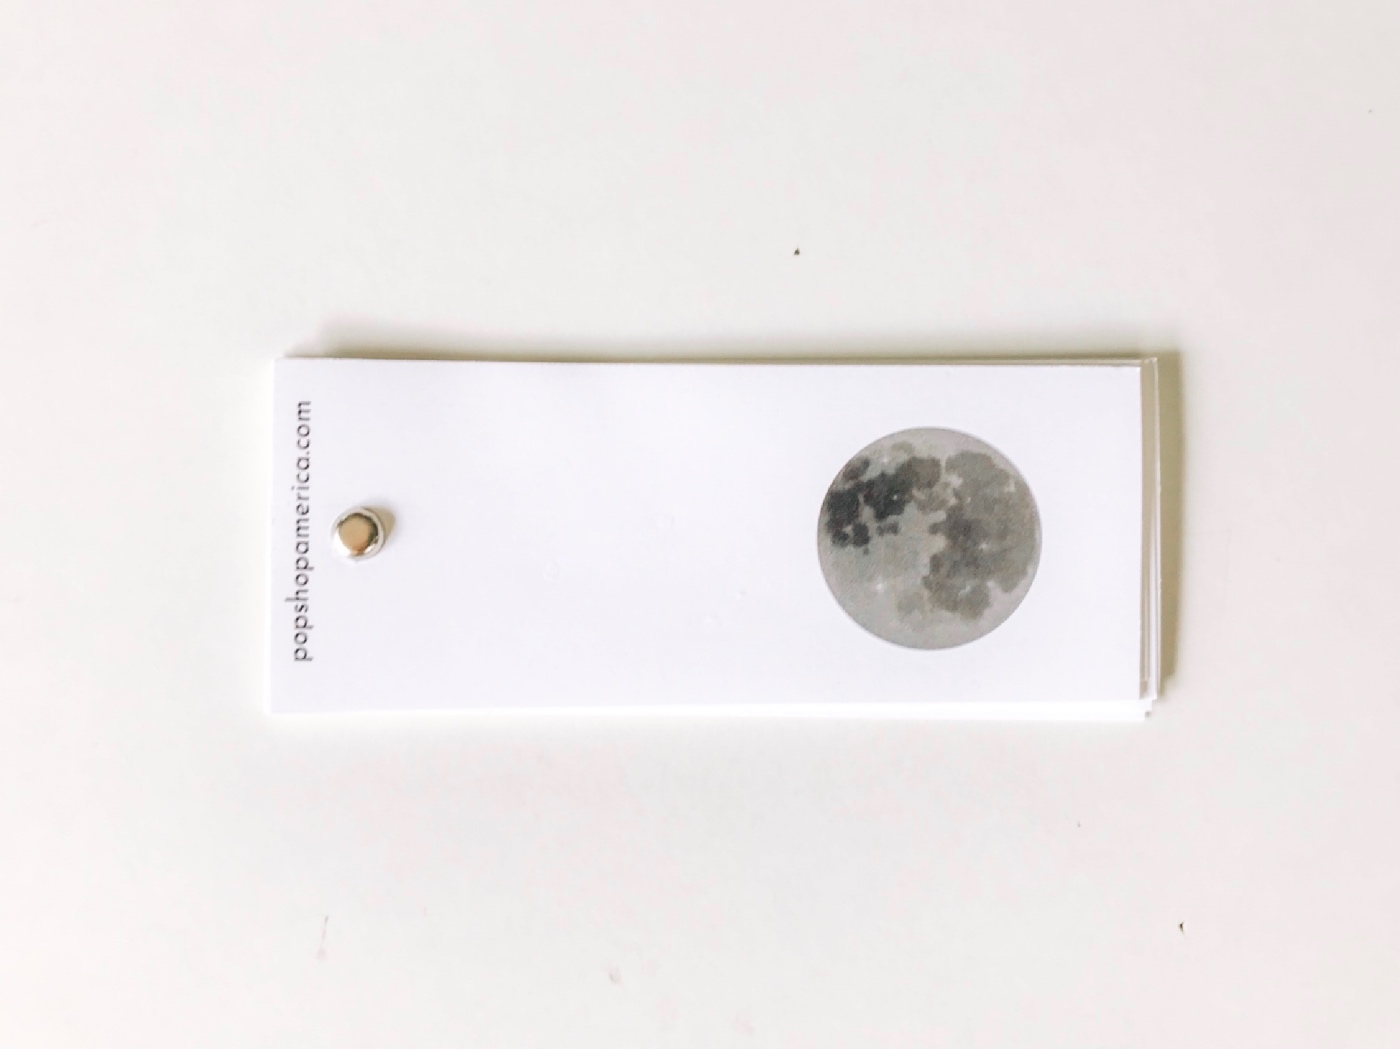 finished-diy-moon-phase-flip-book-pop-shop-america_bright